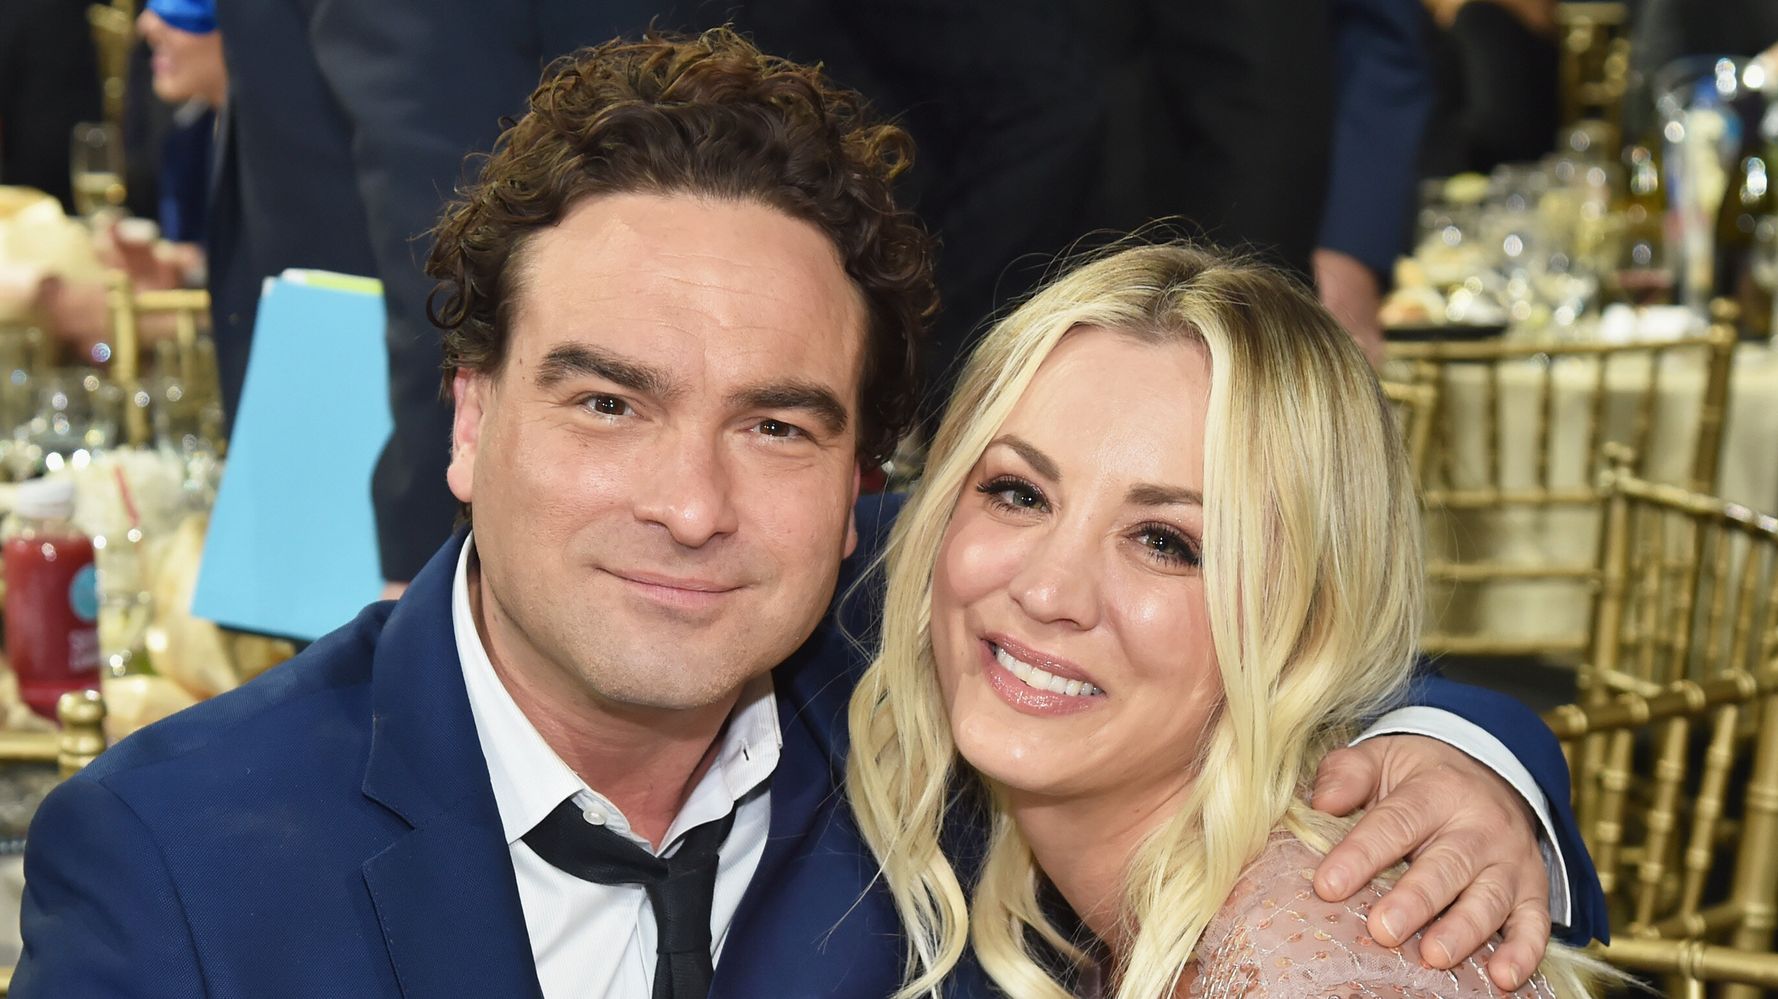 Kaley Cuoco Real Fucking Orgasm - Kaley Cuoco, Johnny Galecki Reflect On How They Fell In Love On 'Big Bang  Theory' Set | HuffPost Entertainment